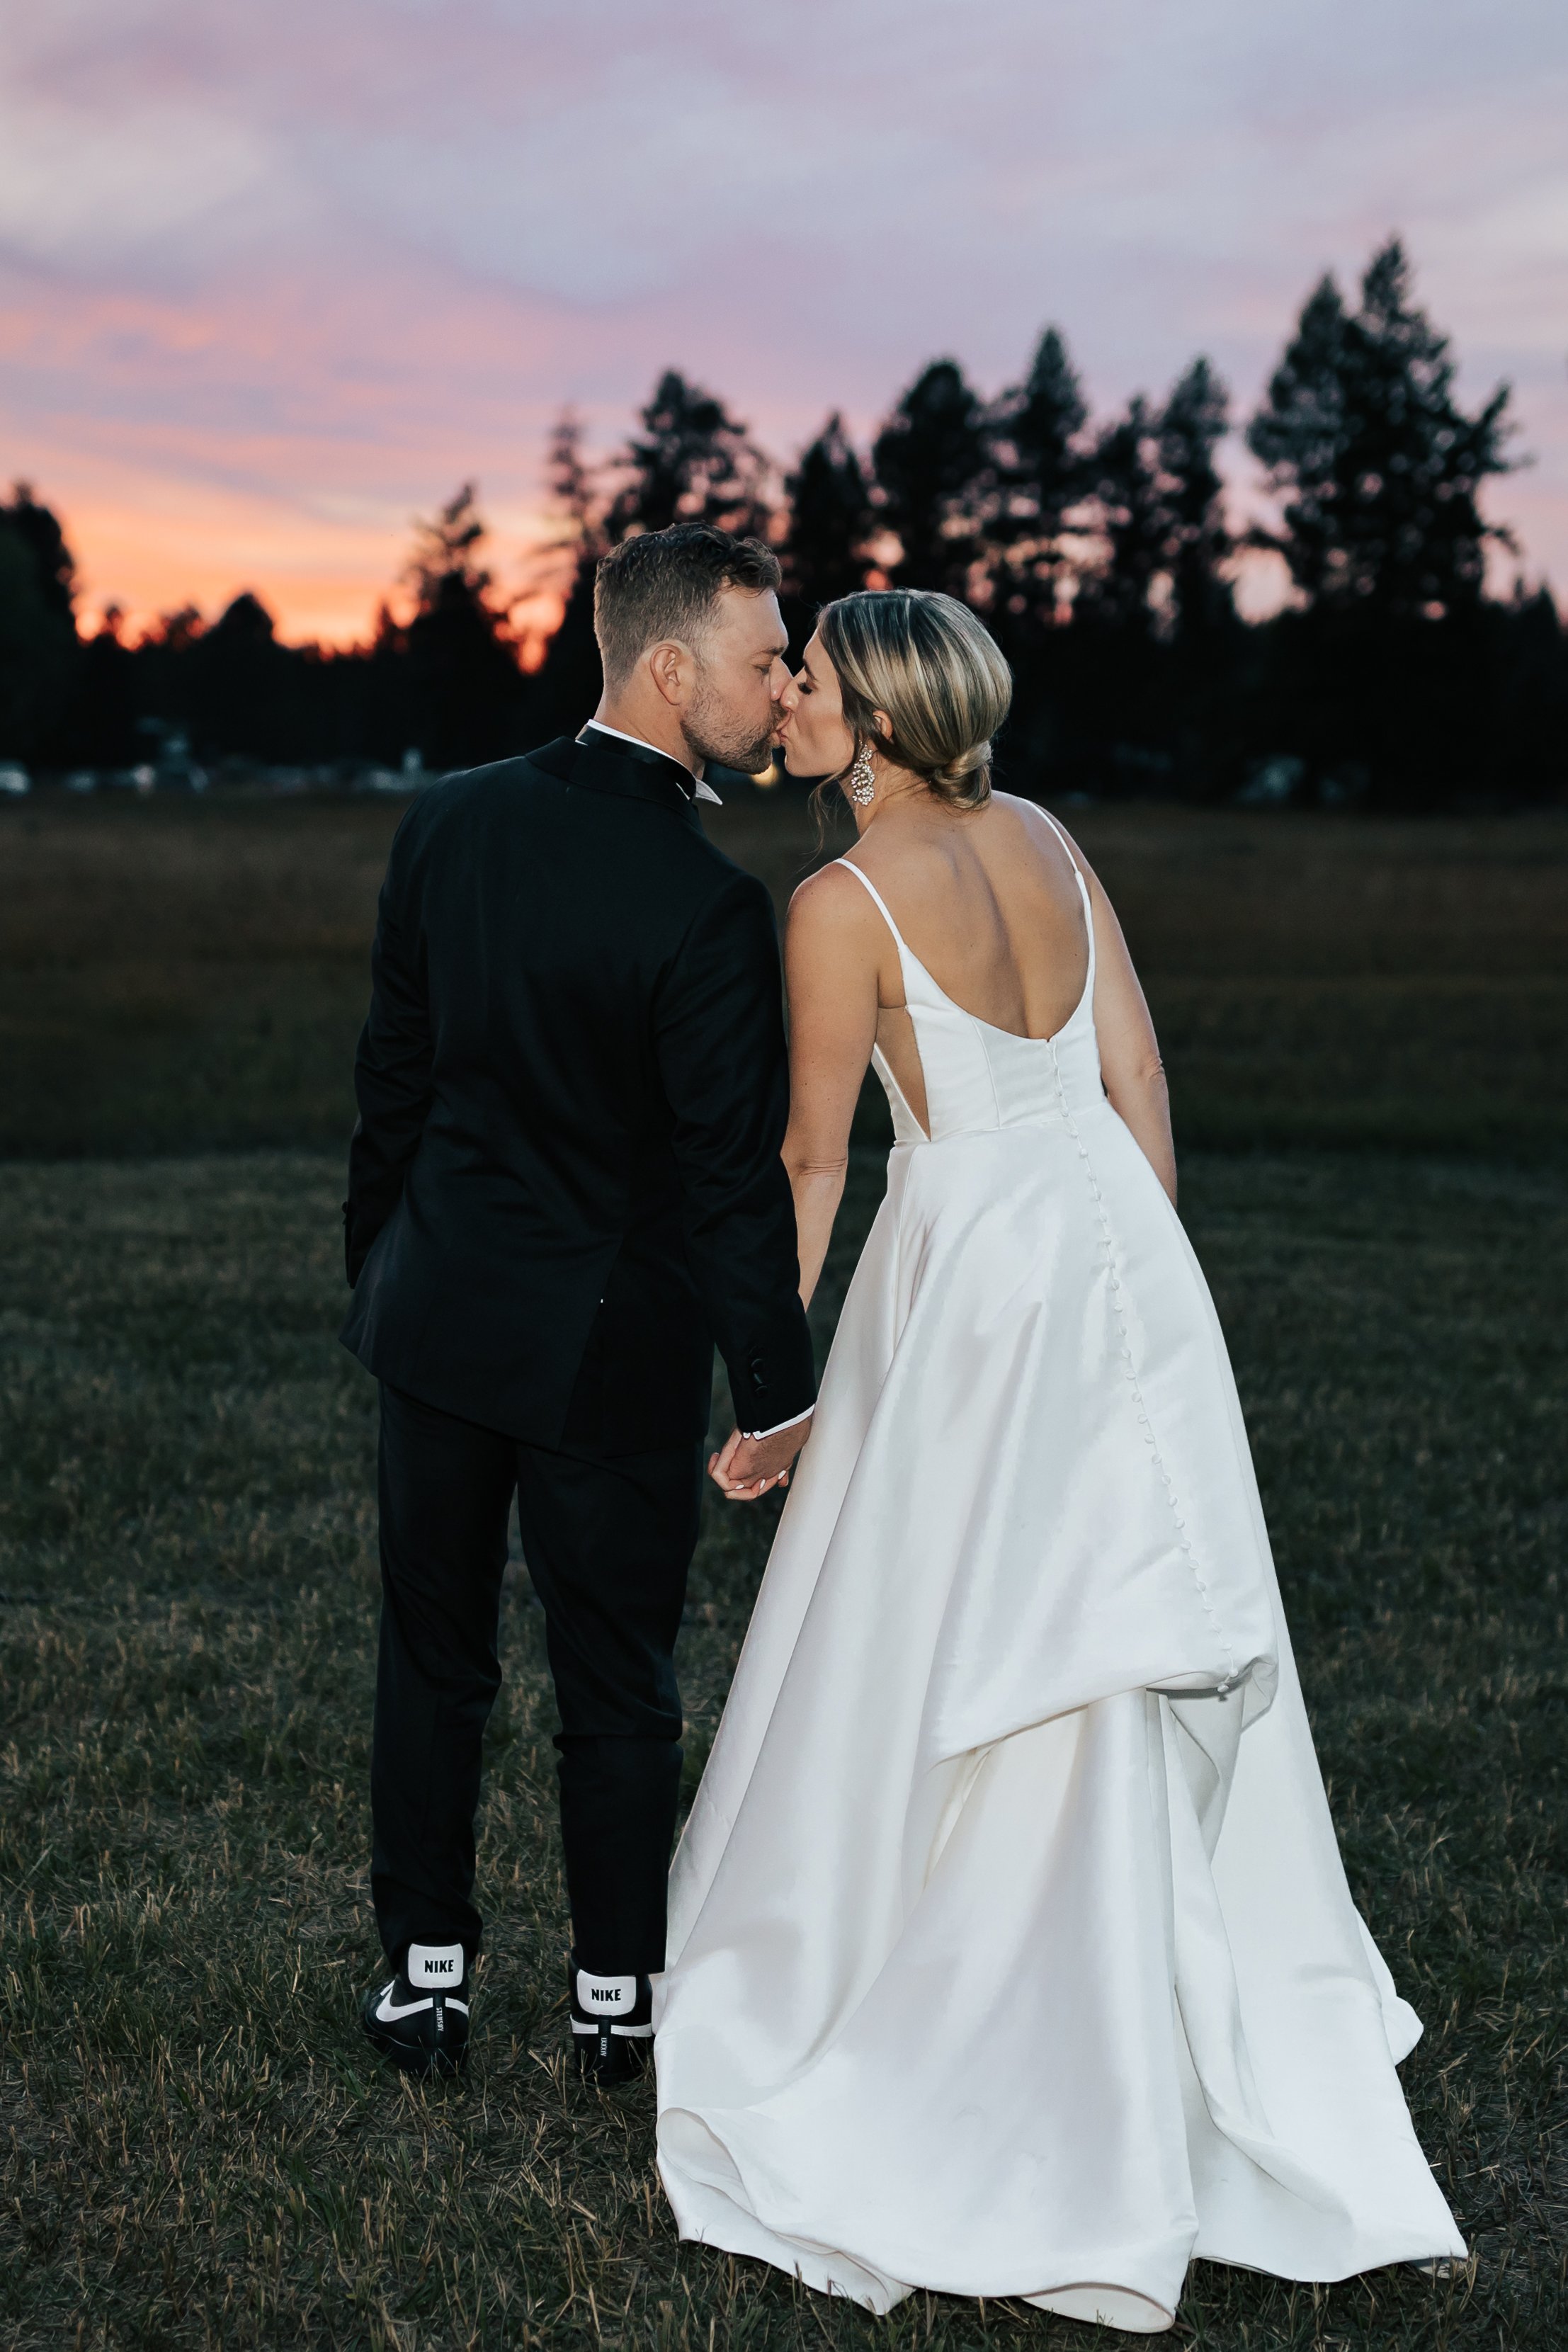  Bride and groom wedding sunset portraits surrounded by beautiful flowers and pine trees. Bride and groom smile at wedding in the forest in Whitefish, Montana. Wedding inspo. Bride is wearing gorgeous large white earrings with a strappy wedding dress